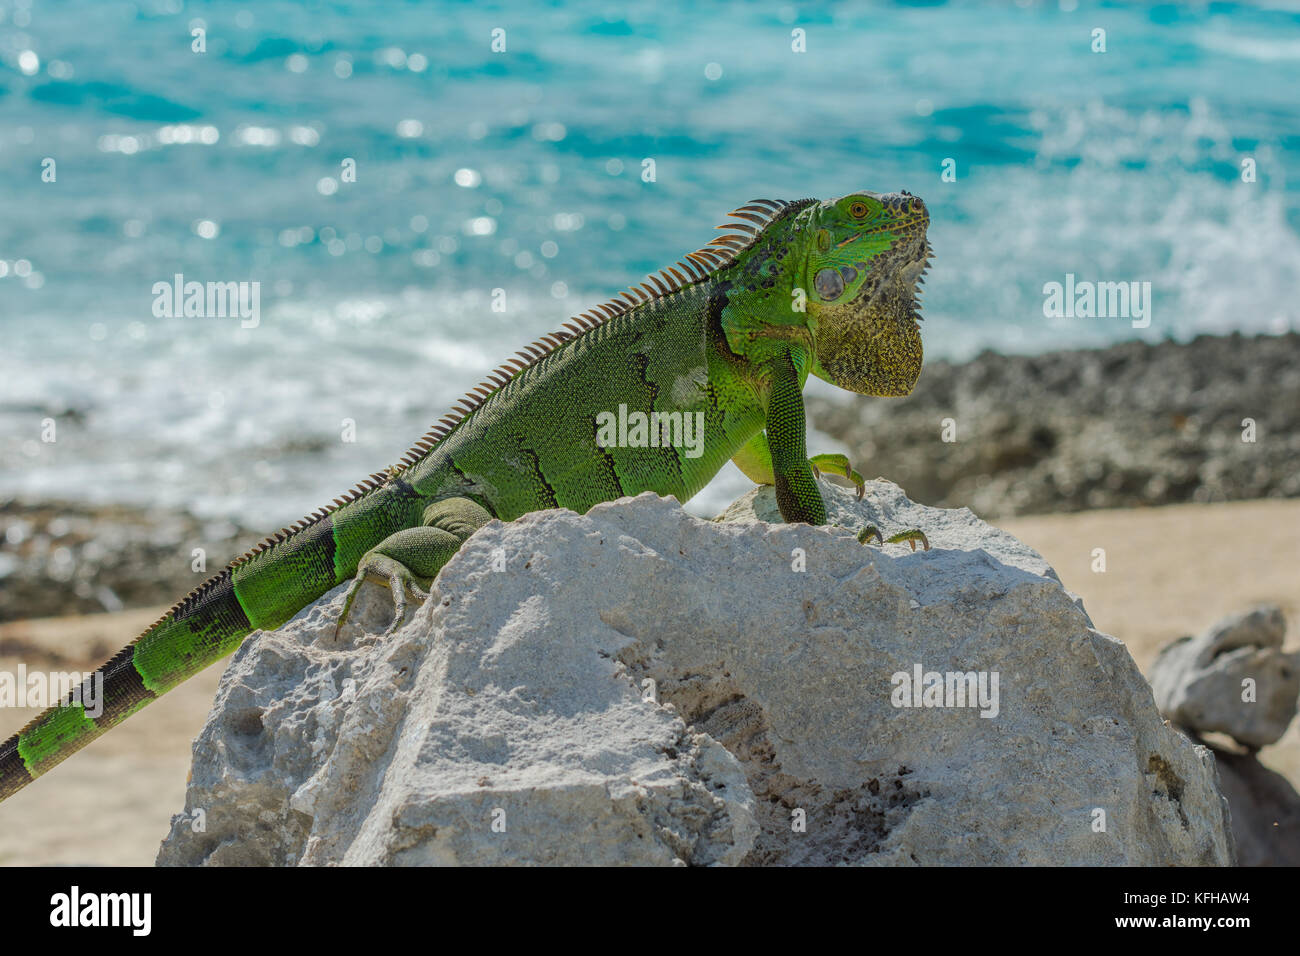 Green Iguana sunning itself on a rock at the beach in Cozumel, Mexico Stock Photo